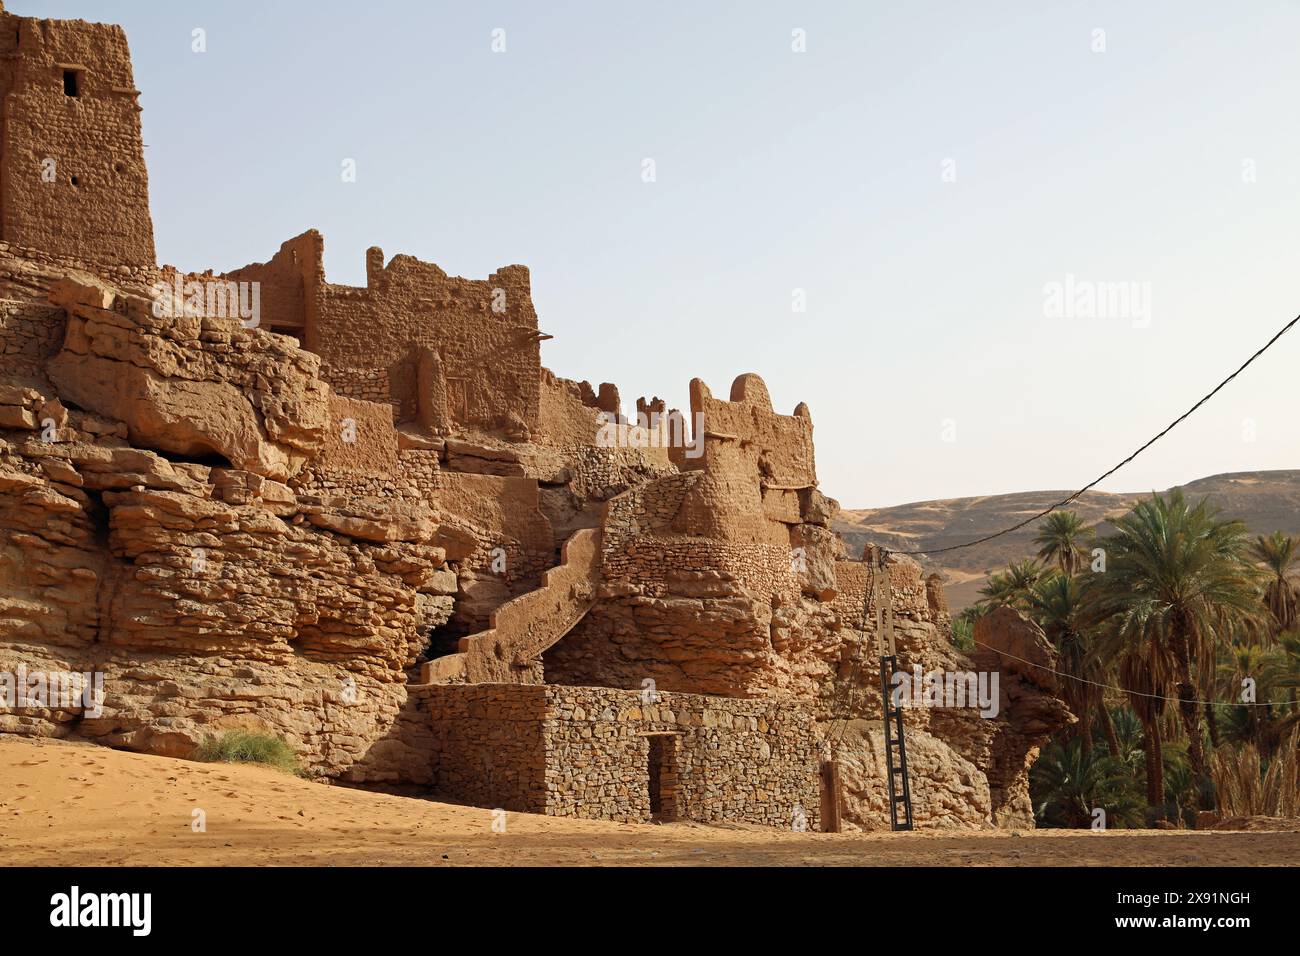 Berber architecture at Taghit in North Africa Stock Photo